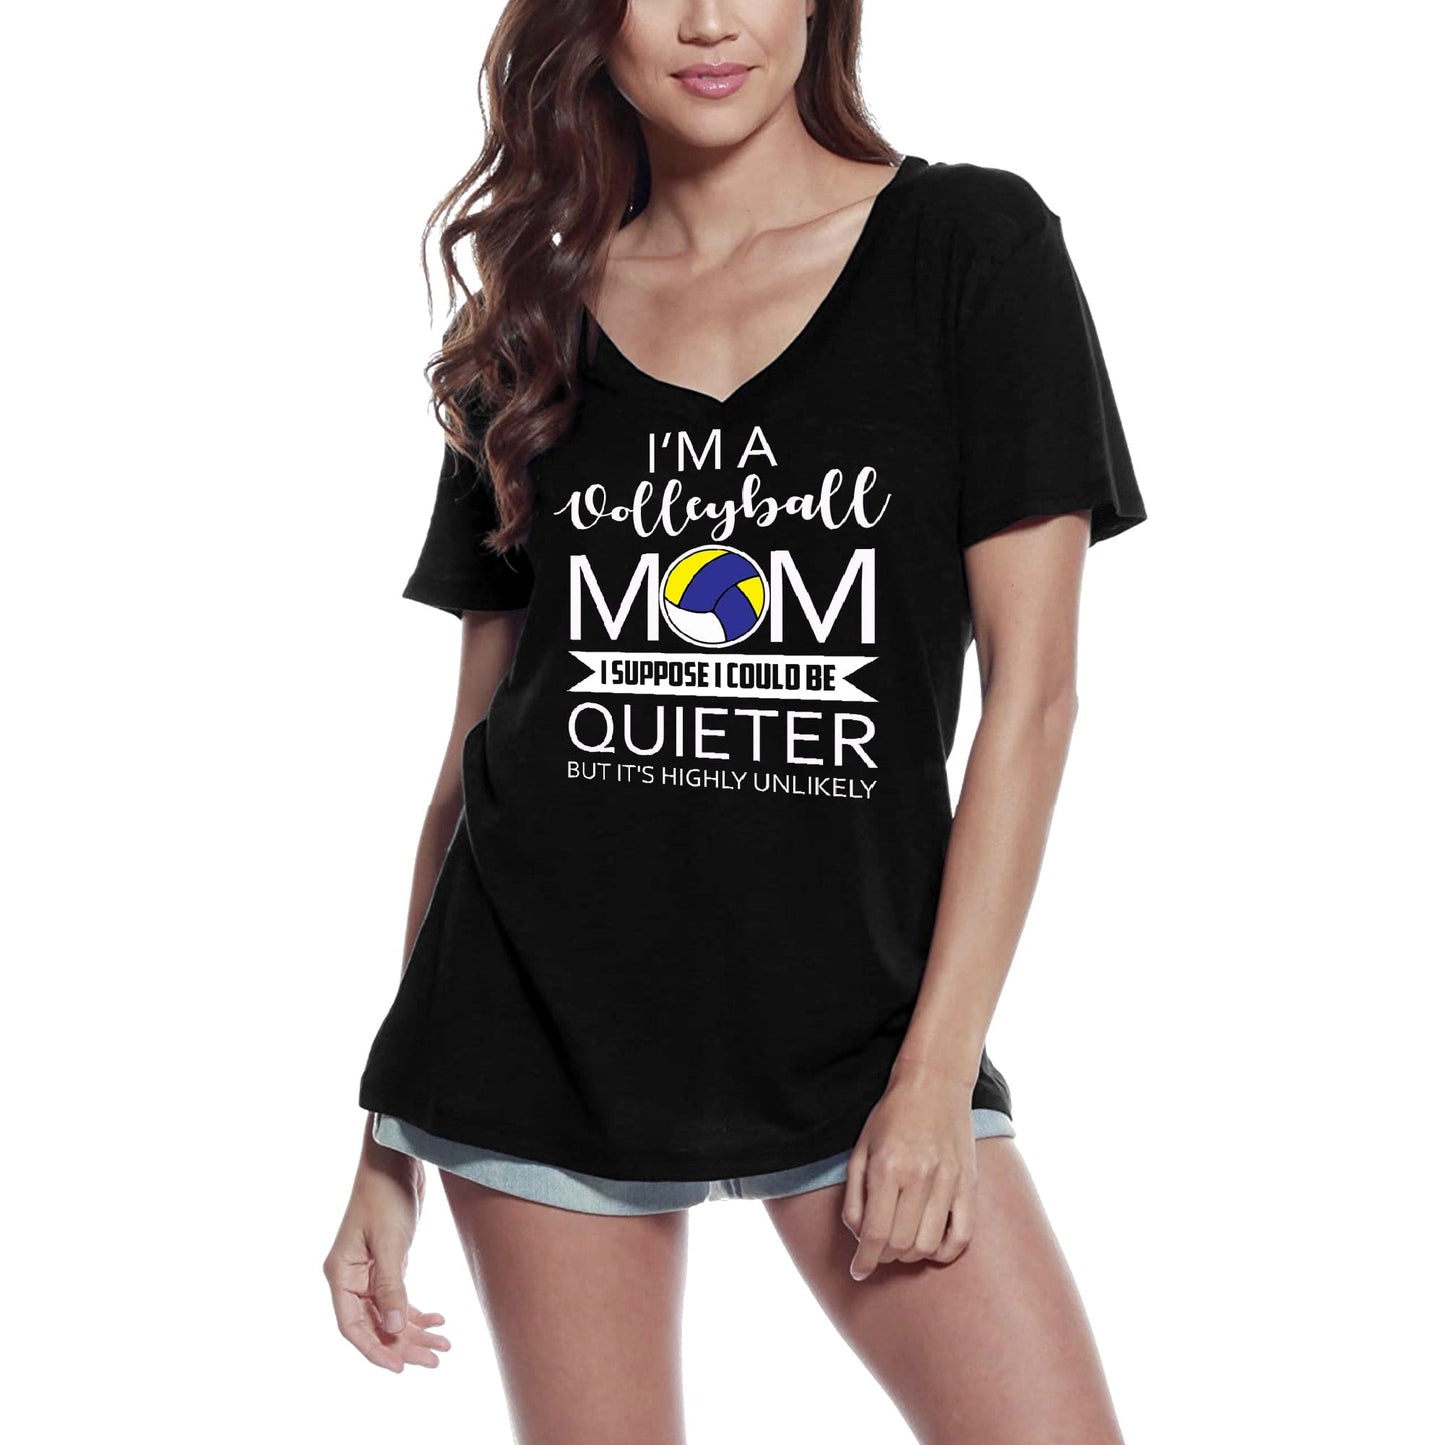 ULTRABASIC Damen-T-Shirt „I'm Volleyball Mom I Could Be Quieter“ – lustiges Sport-Mutter-T-Shirt